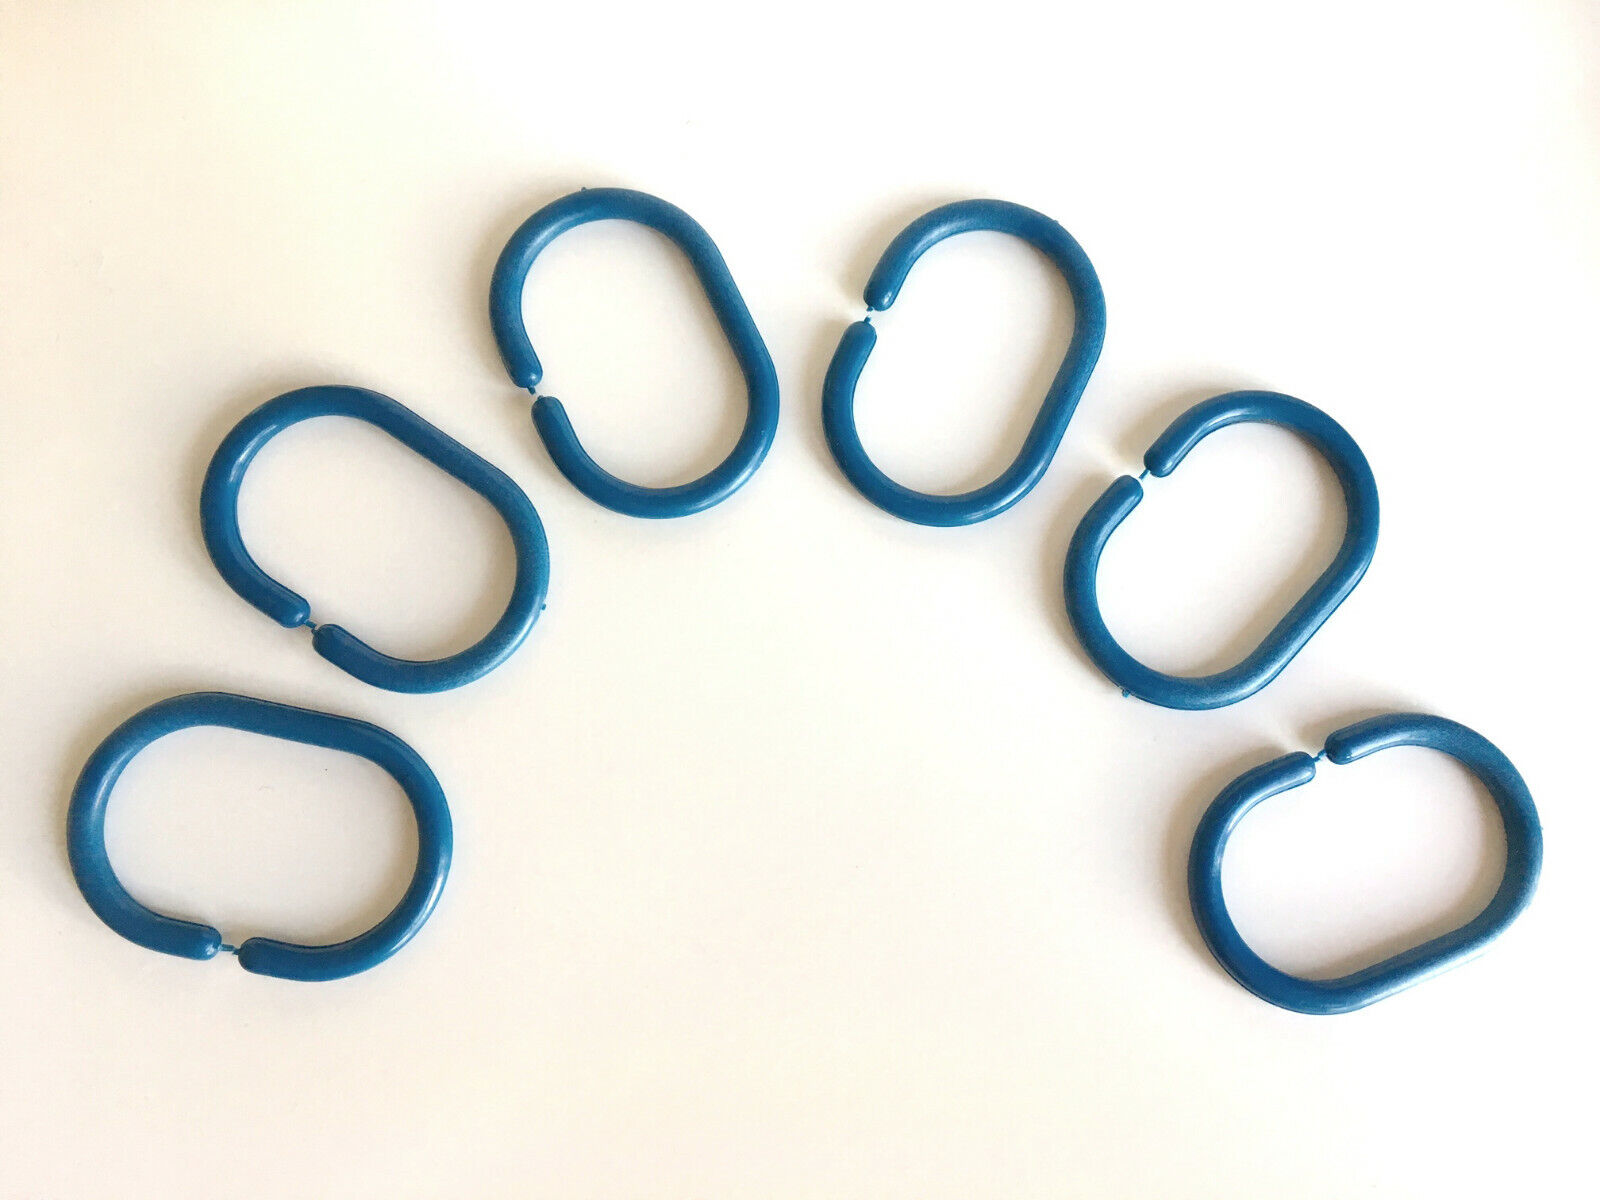 Lowest price challenge Set of 6 Shower Curtain Rings Blue Max 76% OFF Plastic Hooks